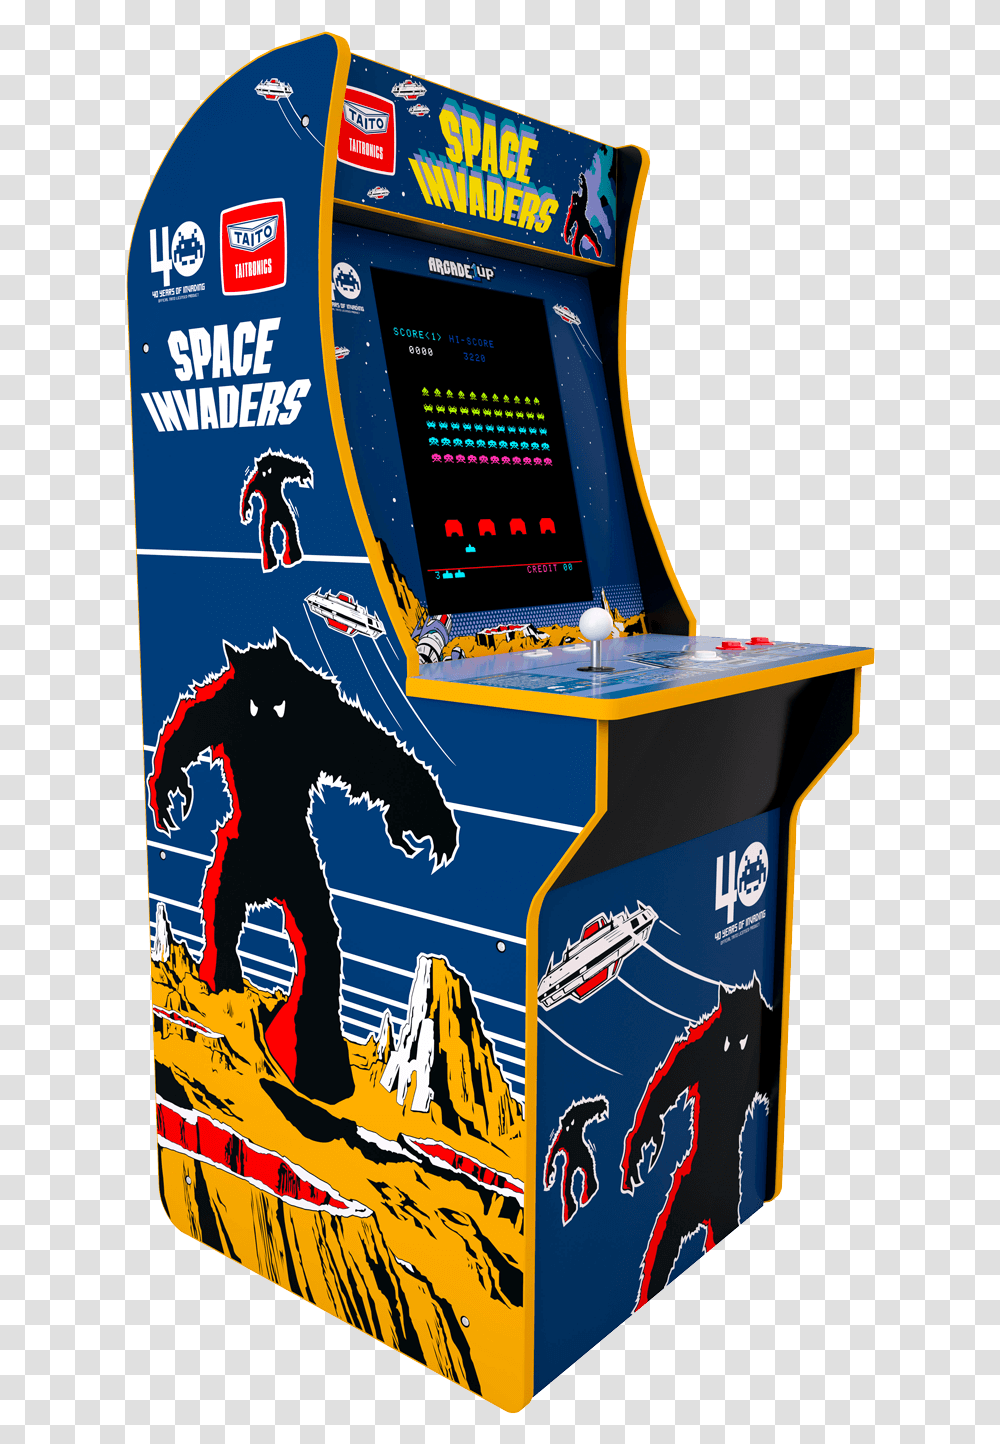 Space Invaders Arcade Cabinet Arcade1up Arcade Games Space Invaders, Arcade Game Machine, Person, Human, Poster Transparent Png